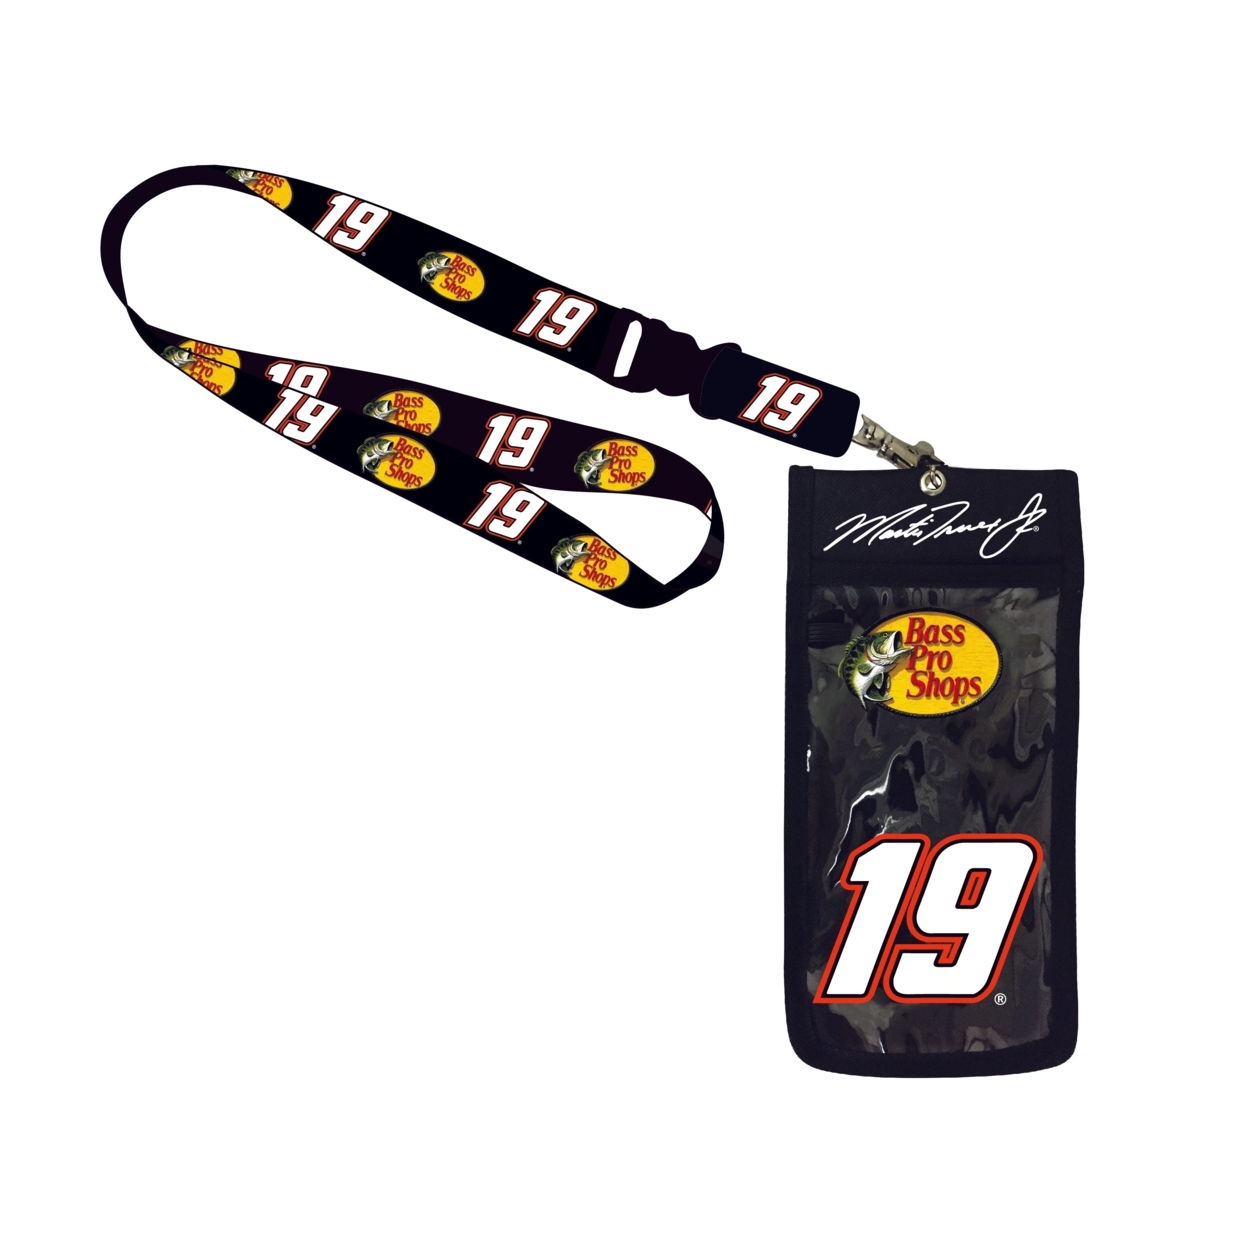 Martin Truex #19 Racing Nascar Deluxe Credential Holder W/Lanyard New For 2020